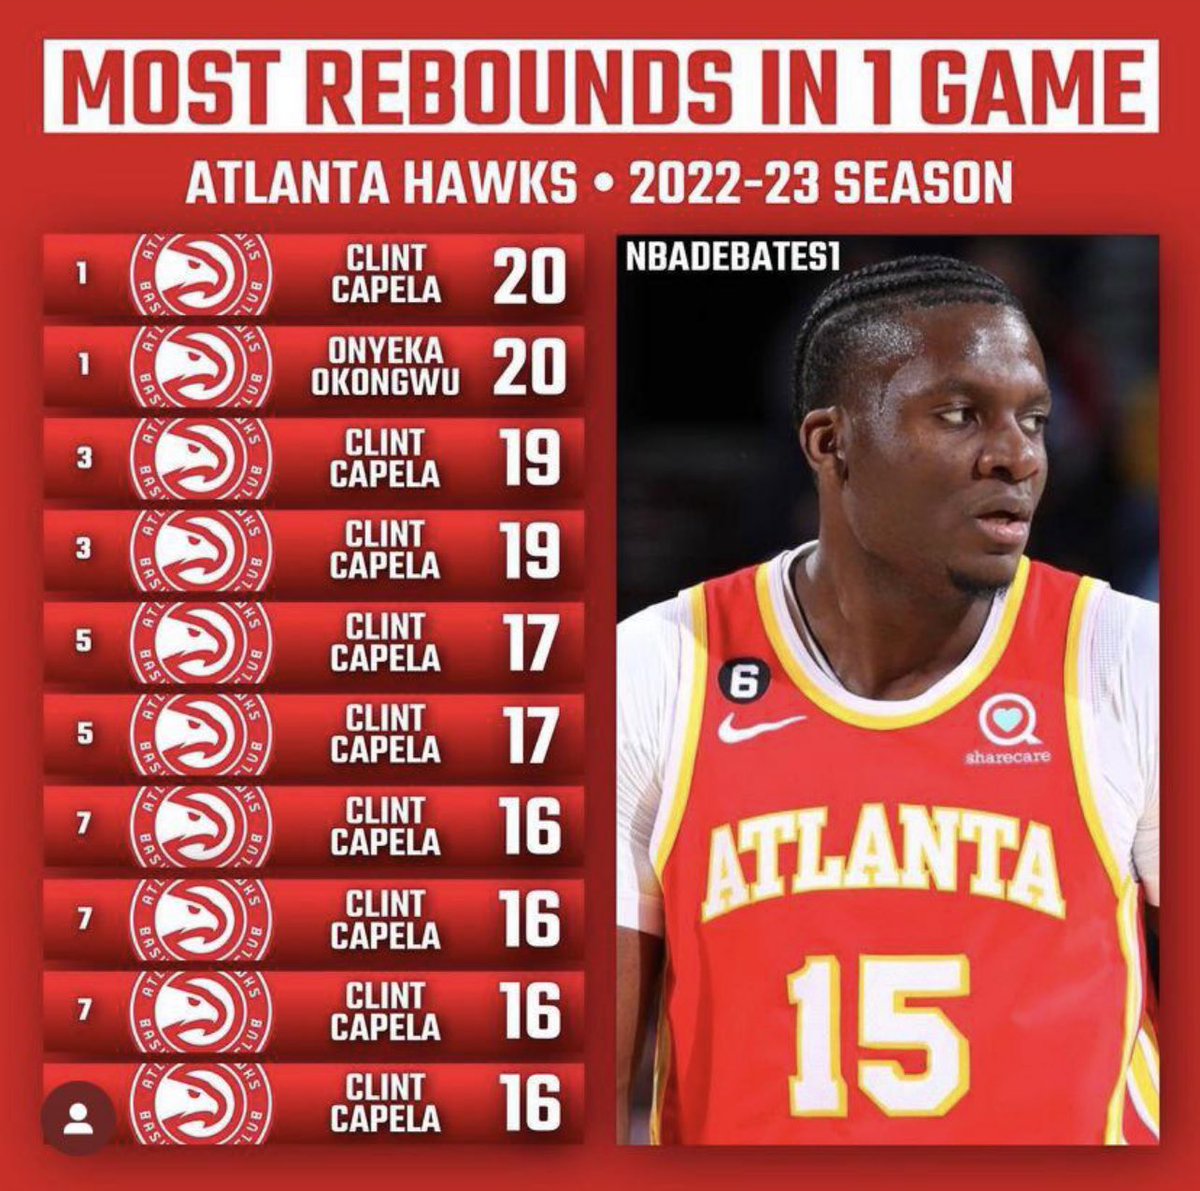 Clint Capela’s rebounding impact for the Hawks